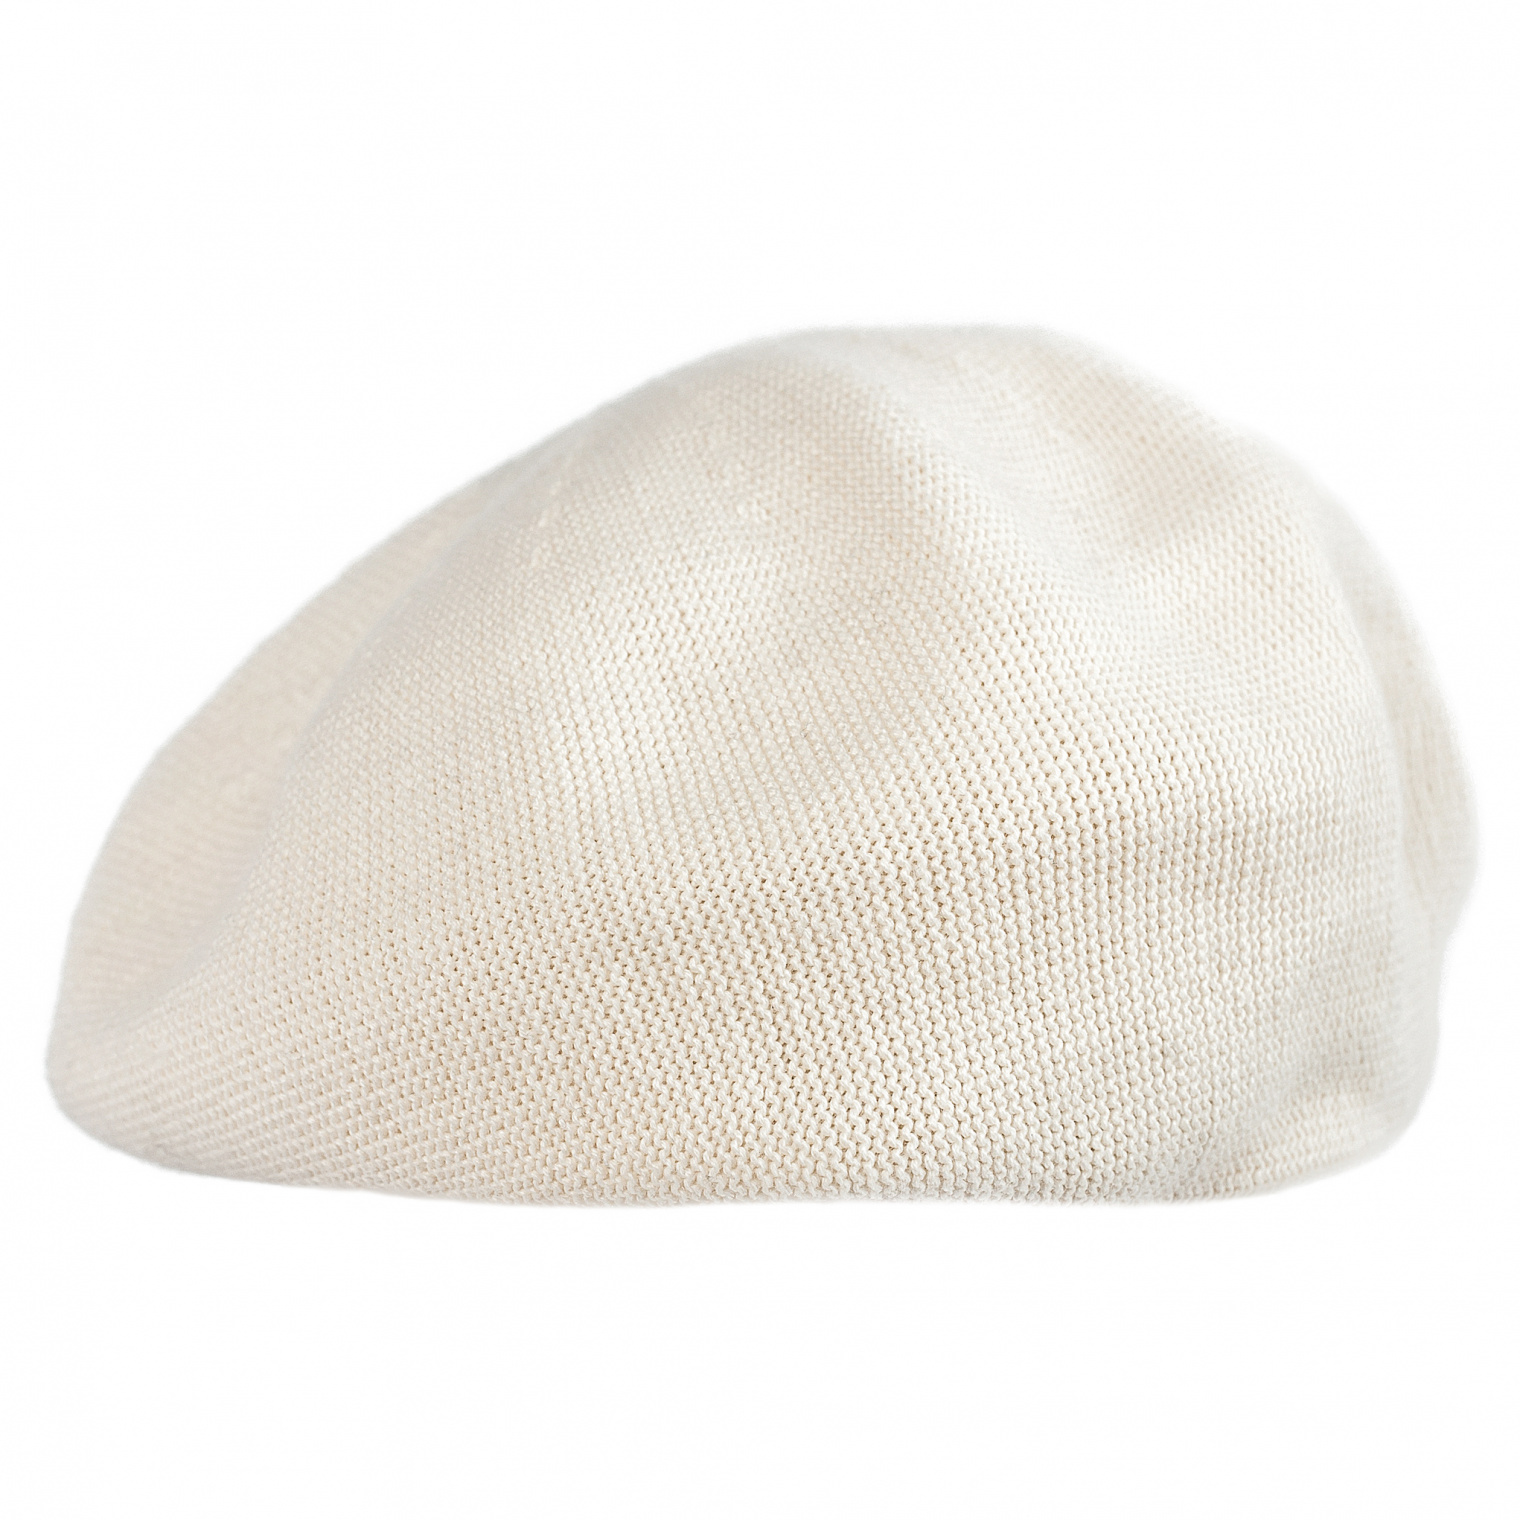 Undercover Ivory Cotton Beret